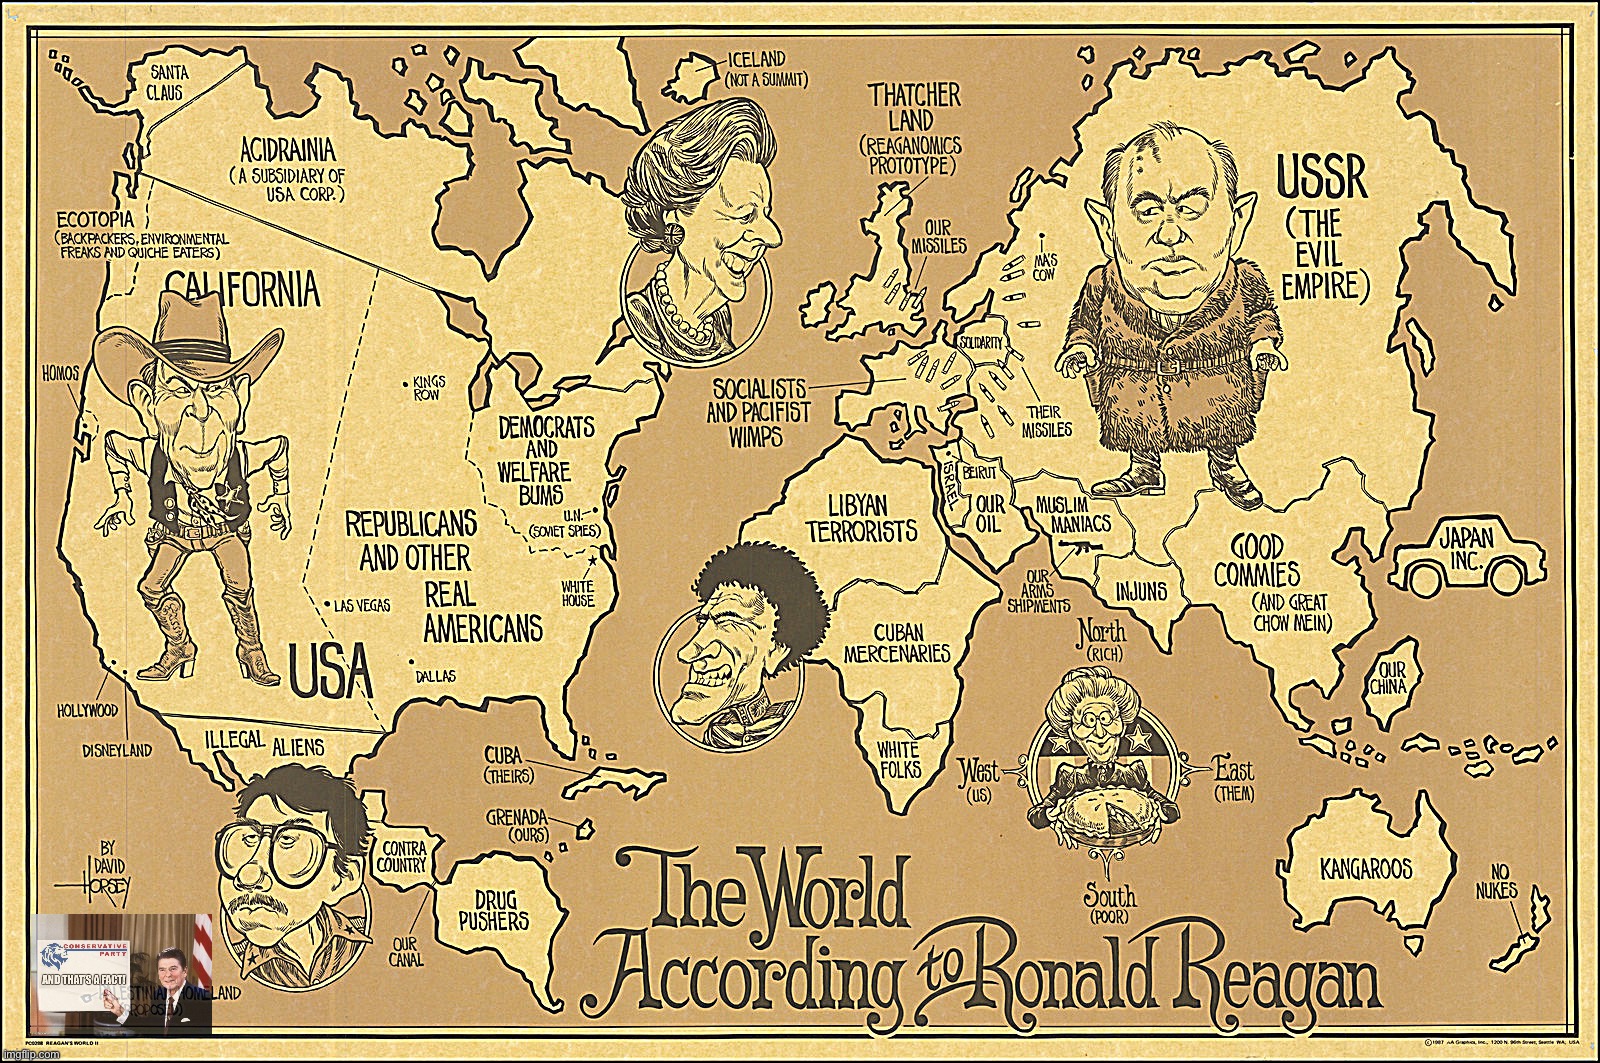 v accurate, based map | image tagged in the world according to ronald reagan,v,accurate,based,map,ronald reagan | made w/ Imgflip meme maker